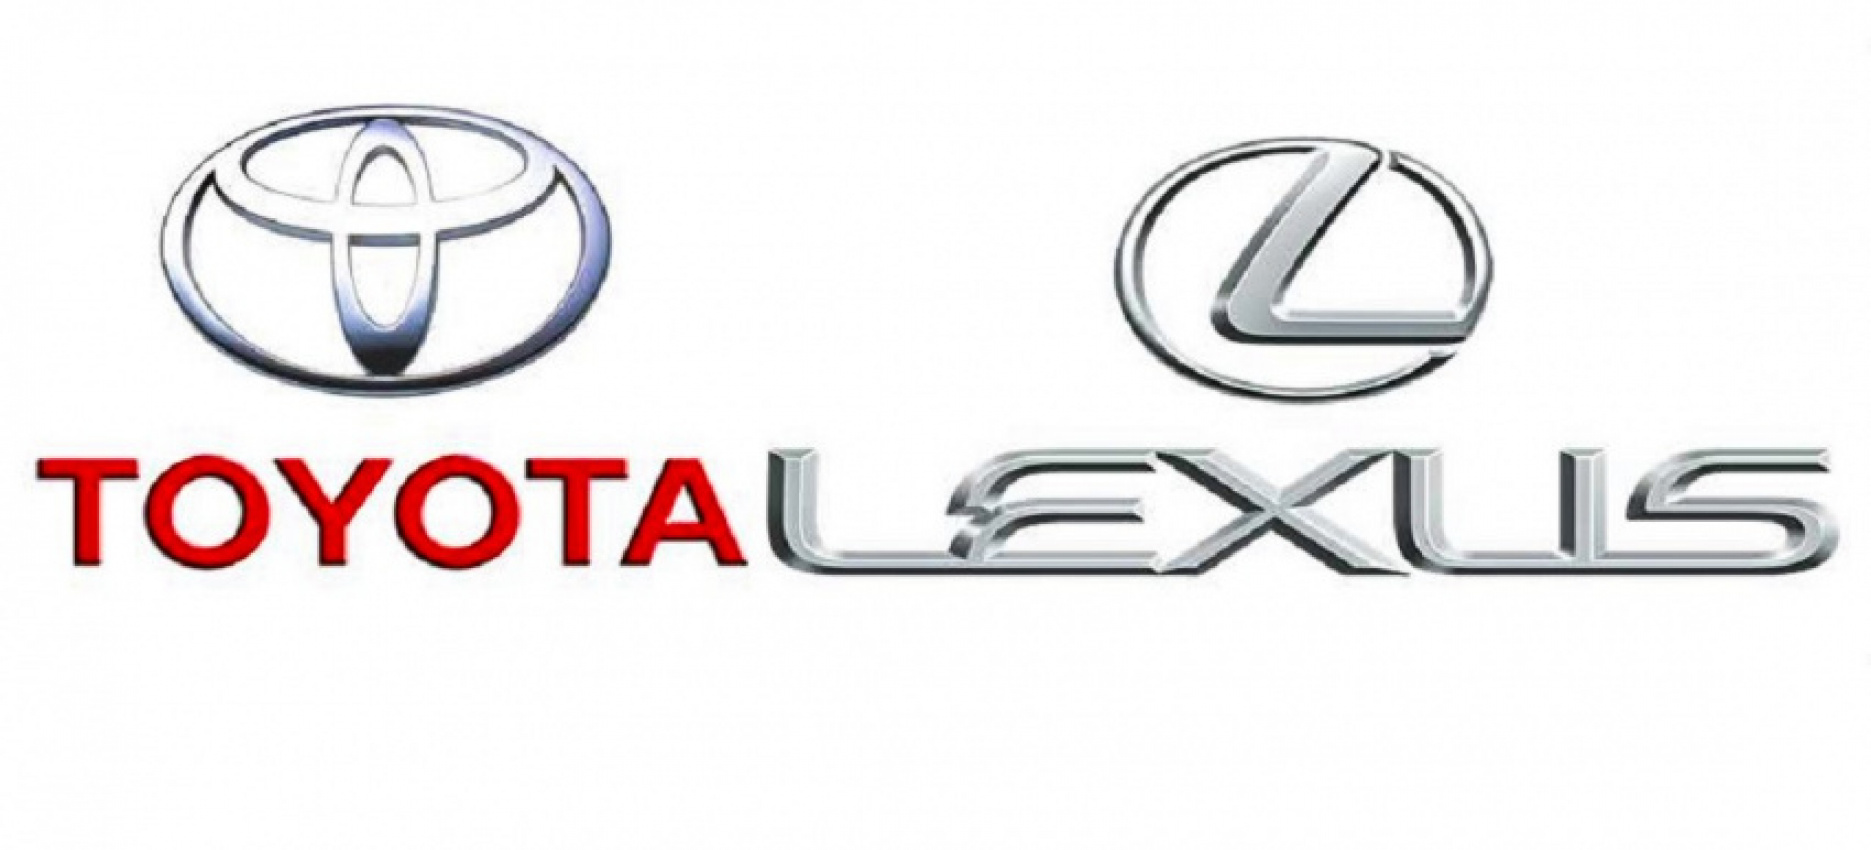 autos, car brands, cars, lexus, toyota, coronavirus, malaysia, movement control order, toyota gazoo racing festival, toyota vios challenge, umw toyota motor, final round of toyota gazoo racing festival cancelled; toyota and lexus owners can contact customer care for assistance